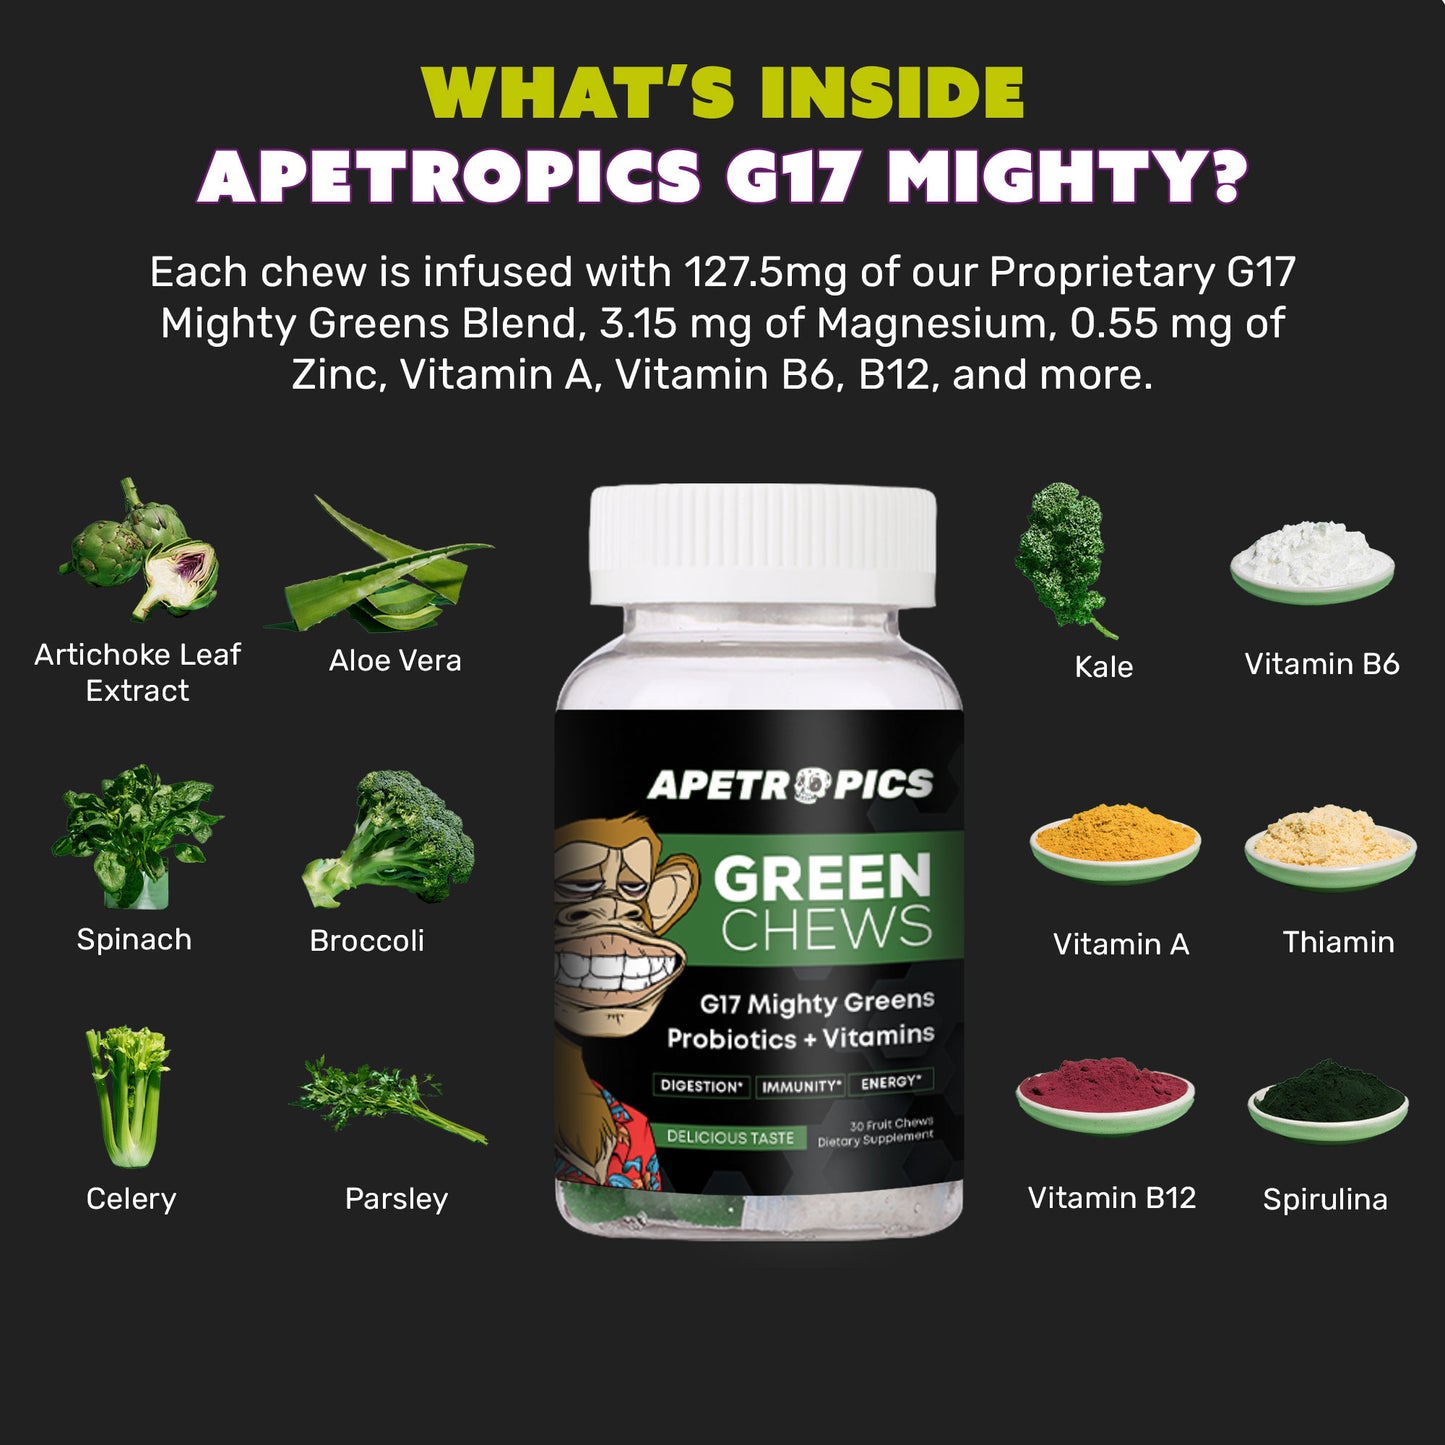 What's Inside Apetropics G17 Mighty?